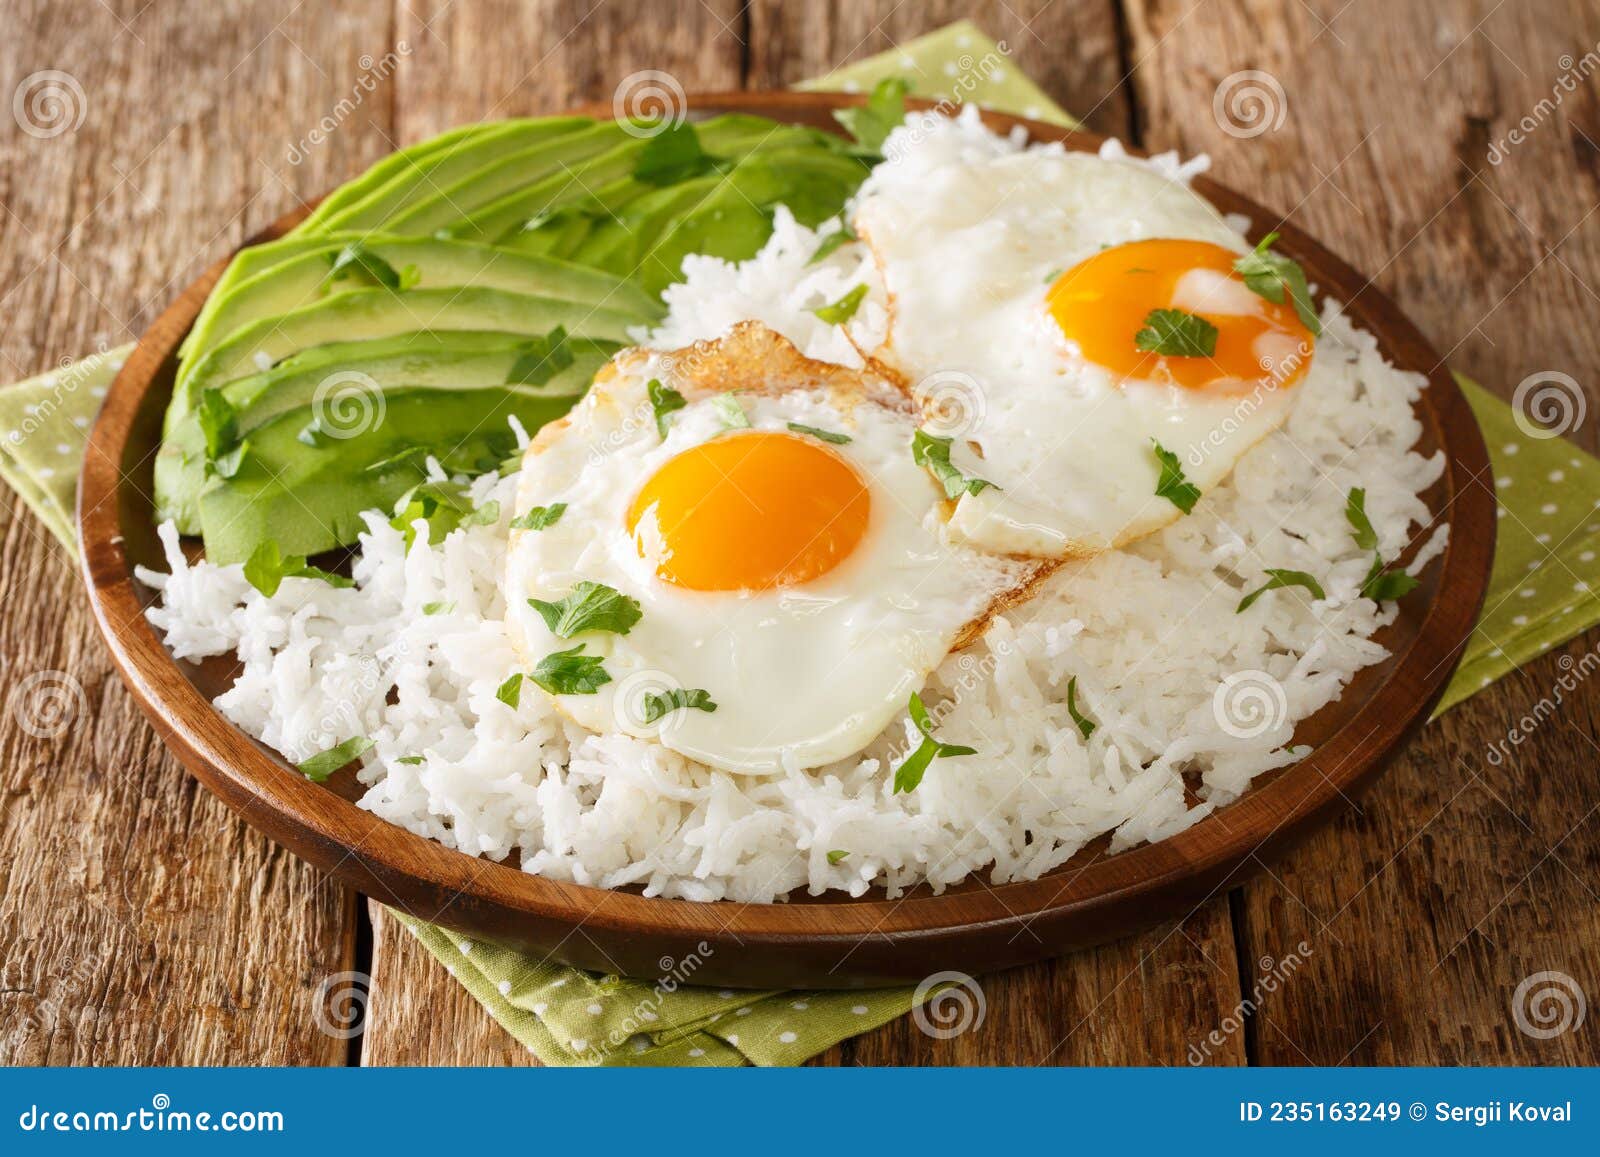 boiled rice on top with fried eggs served with fresh avocado close-up in a plate. horizontal